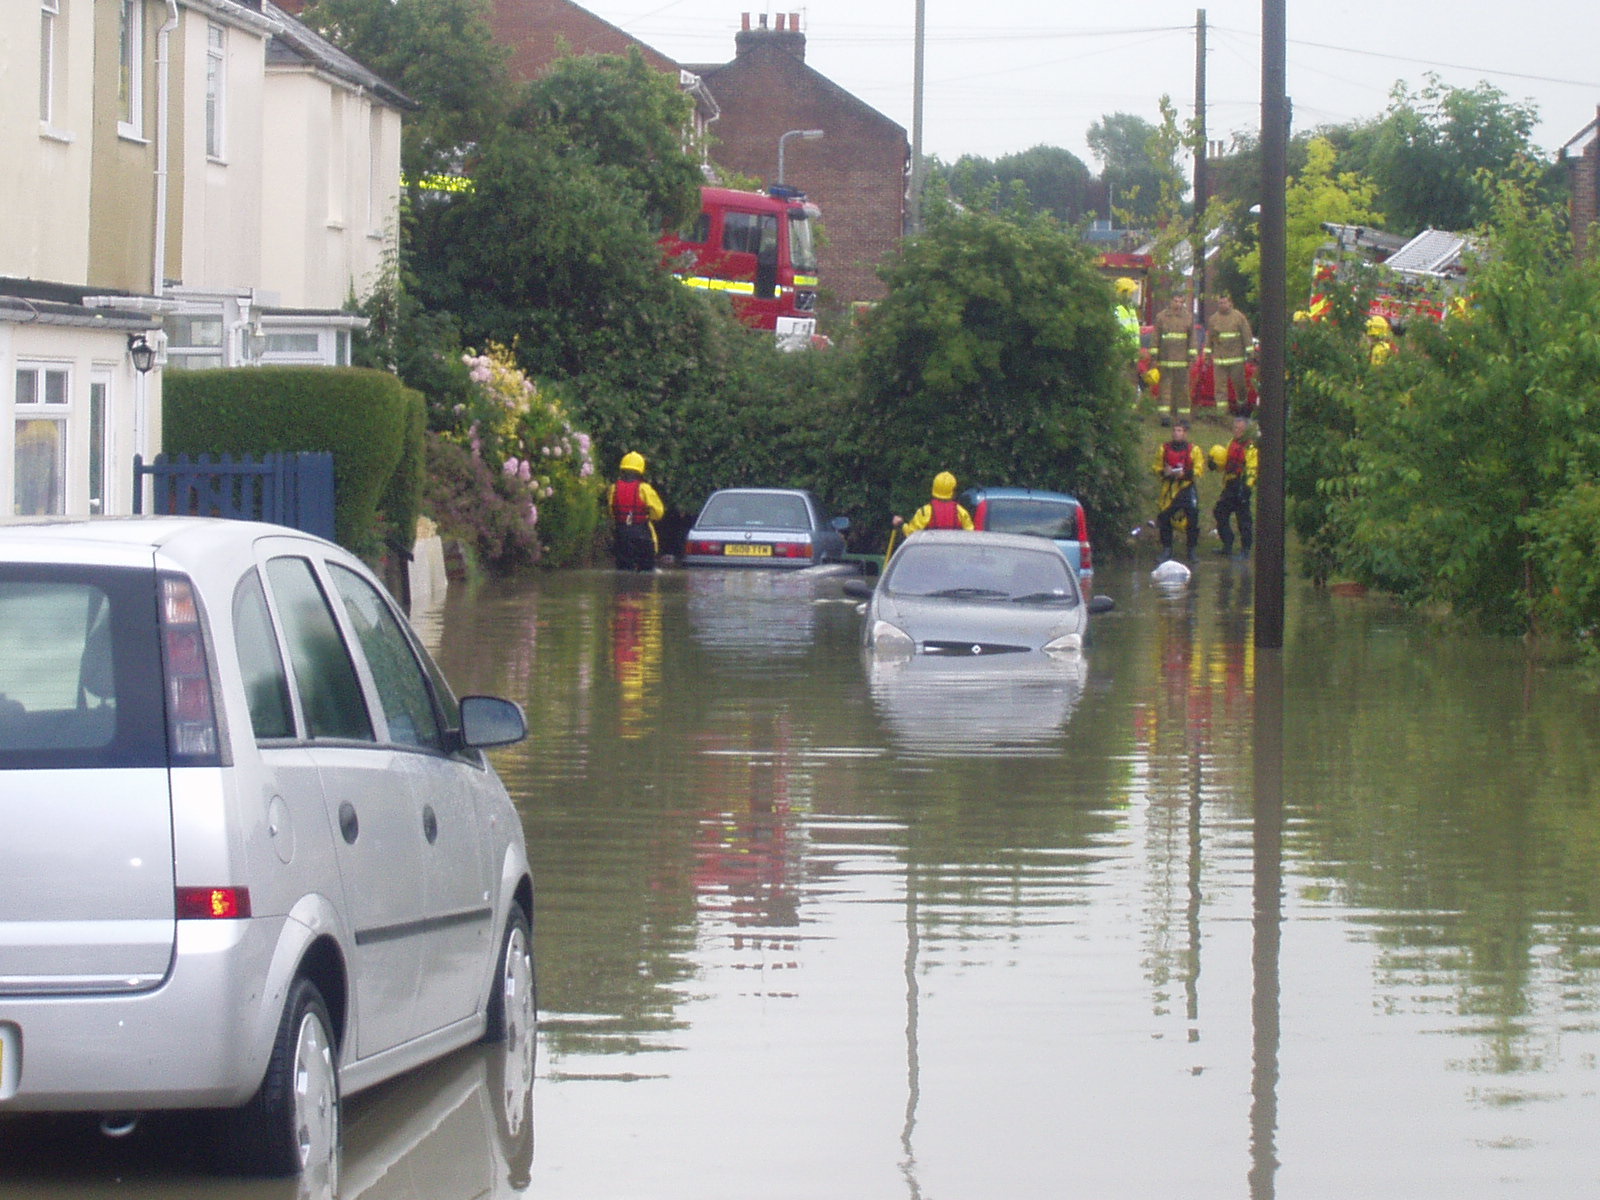 Flooded street with submerged cars, with Fire and rescue engine and workers.